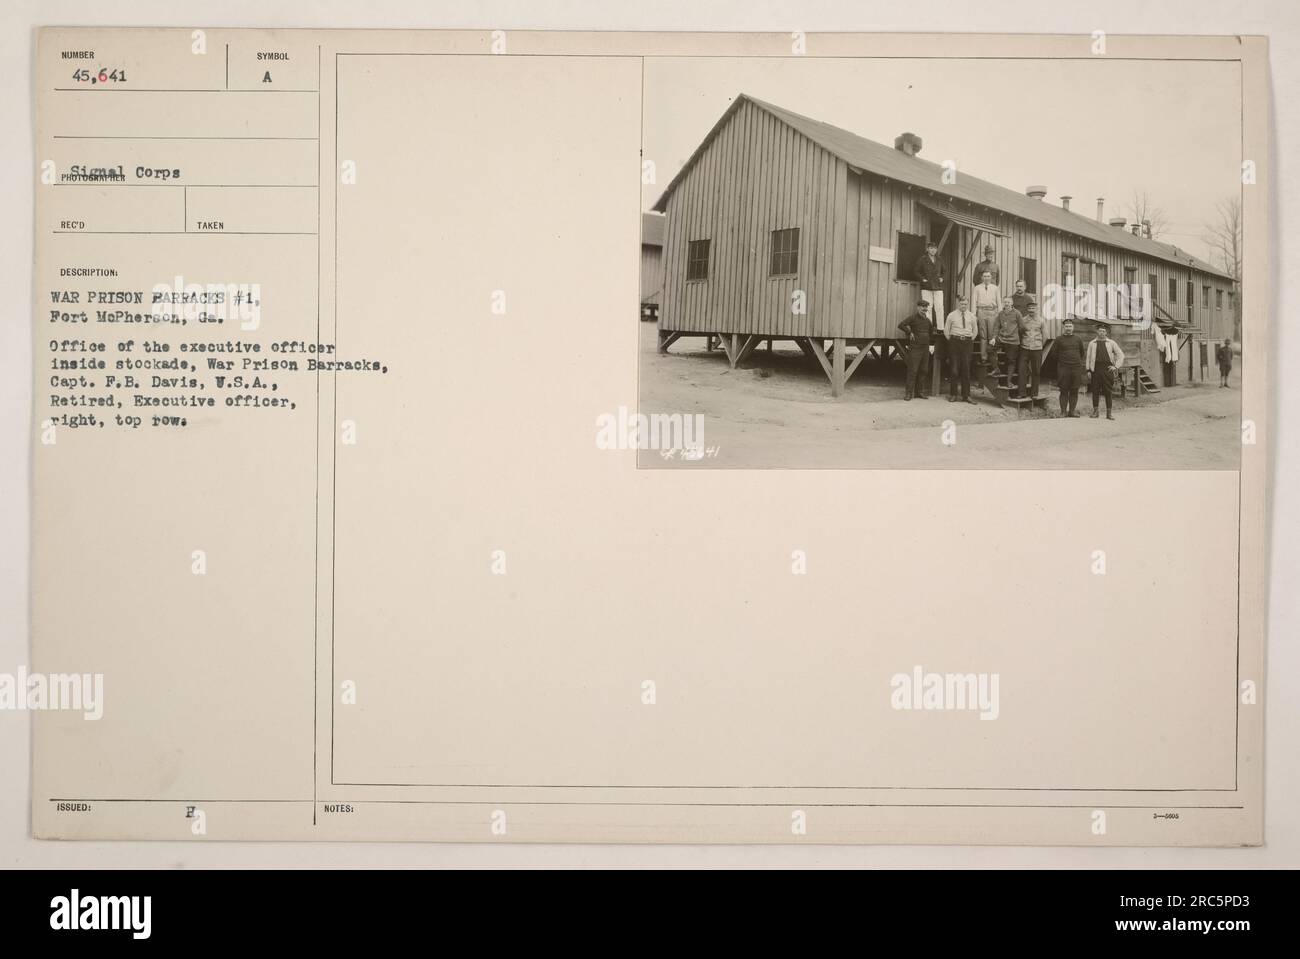 An image showing the office of the executive officer inside stockade at War Prison Barracks #1, located at Fort McPherson, Georgia during World War One. Captain F.B. Davis, a retired U.S.A. officer, is seen on the right in the top row of uniforms numbered 45,641 in the Signal Corps. The photograph was taken to document activities at the war prison barracks. Stock Photo